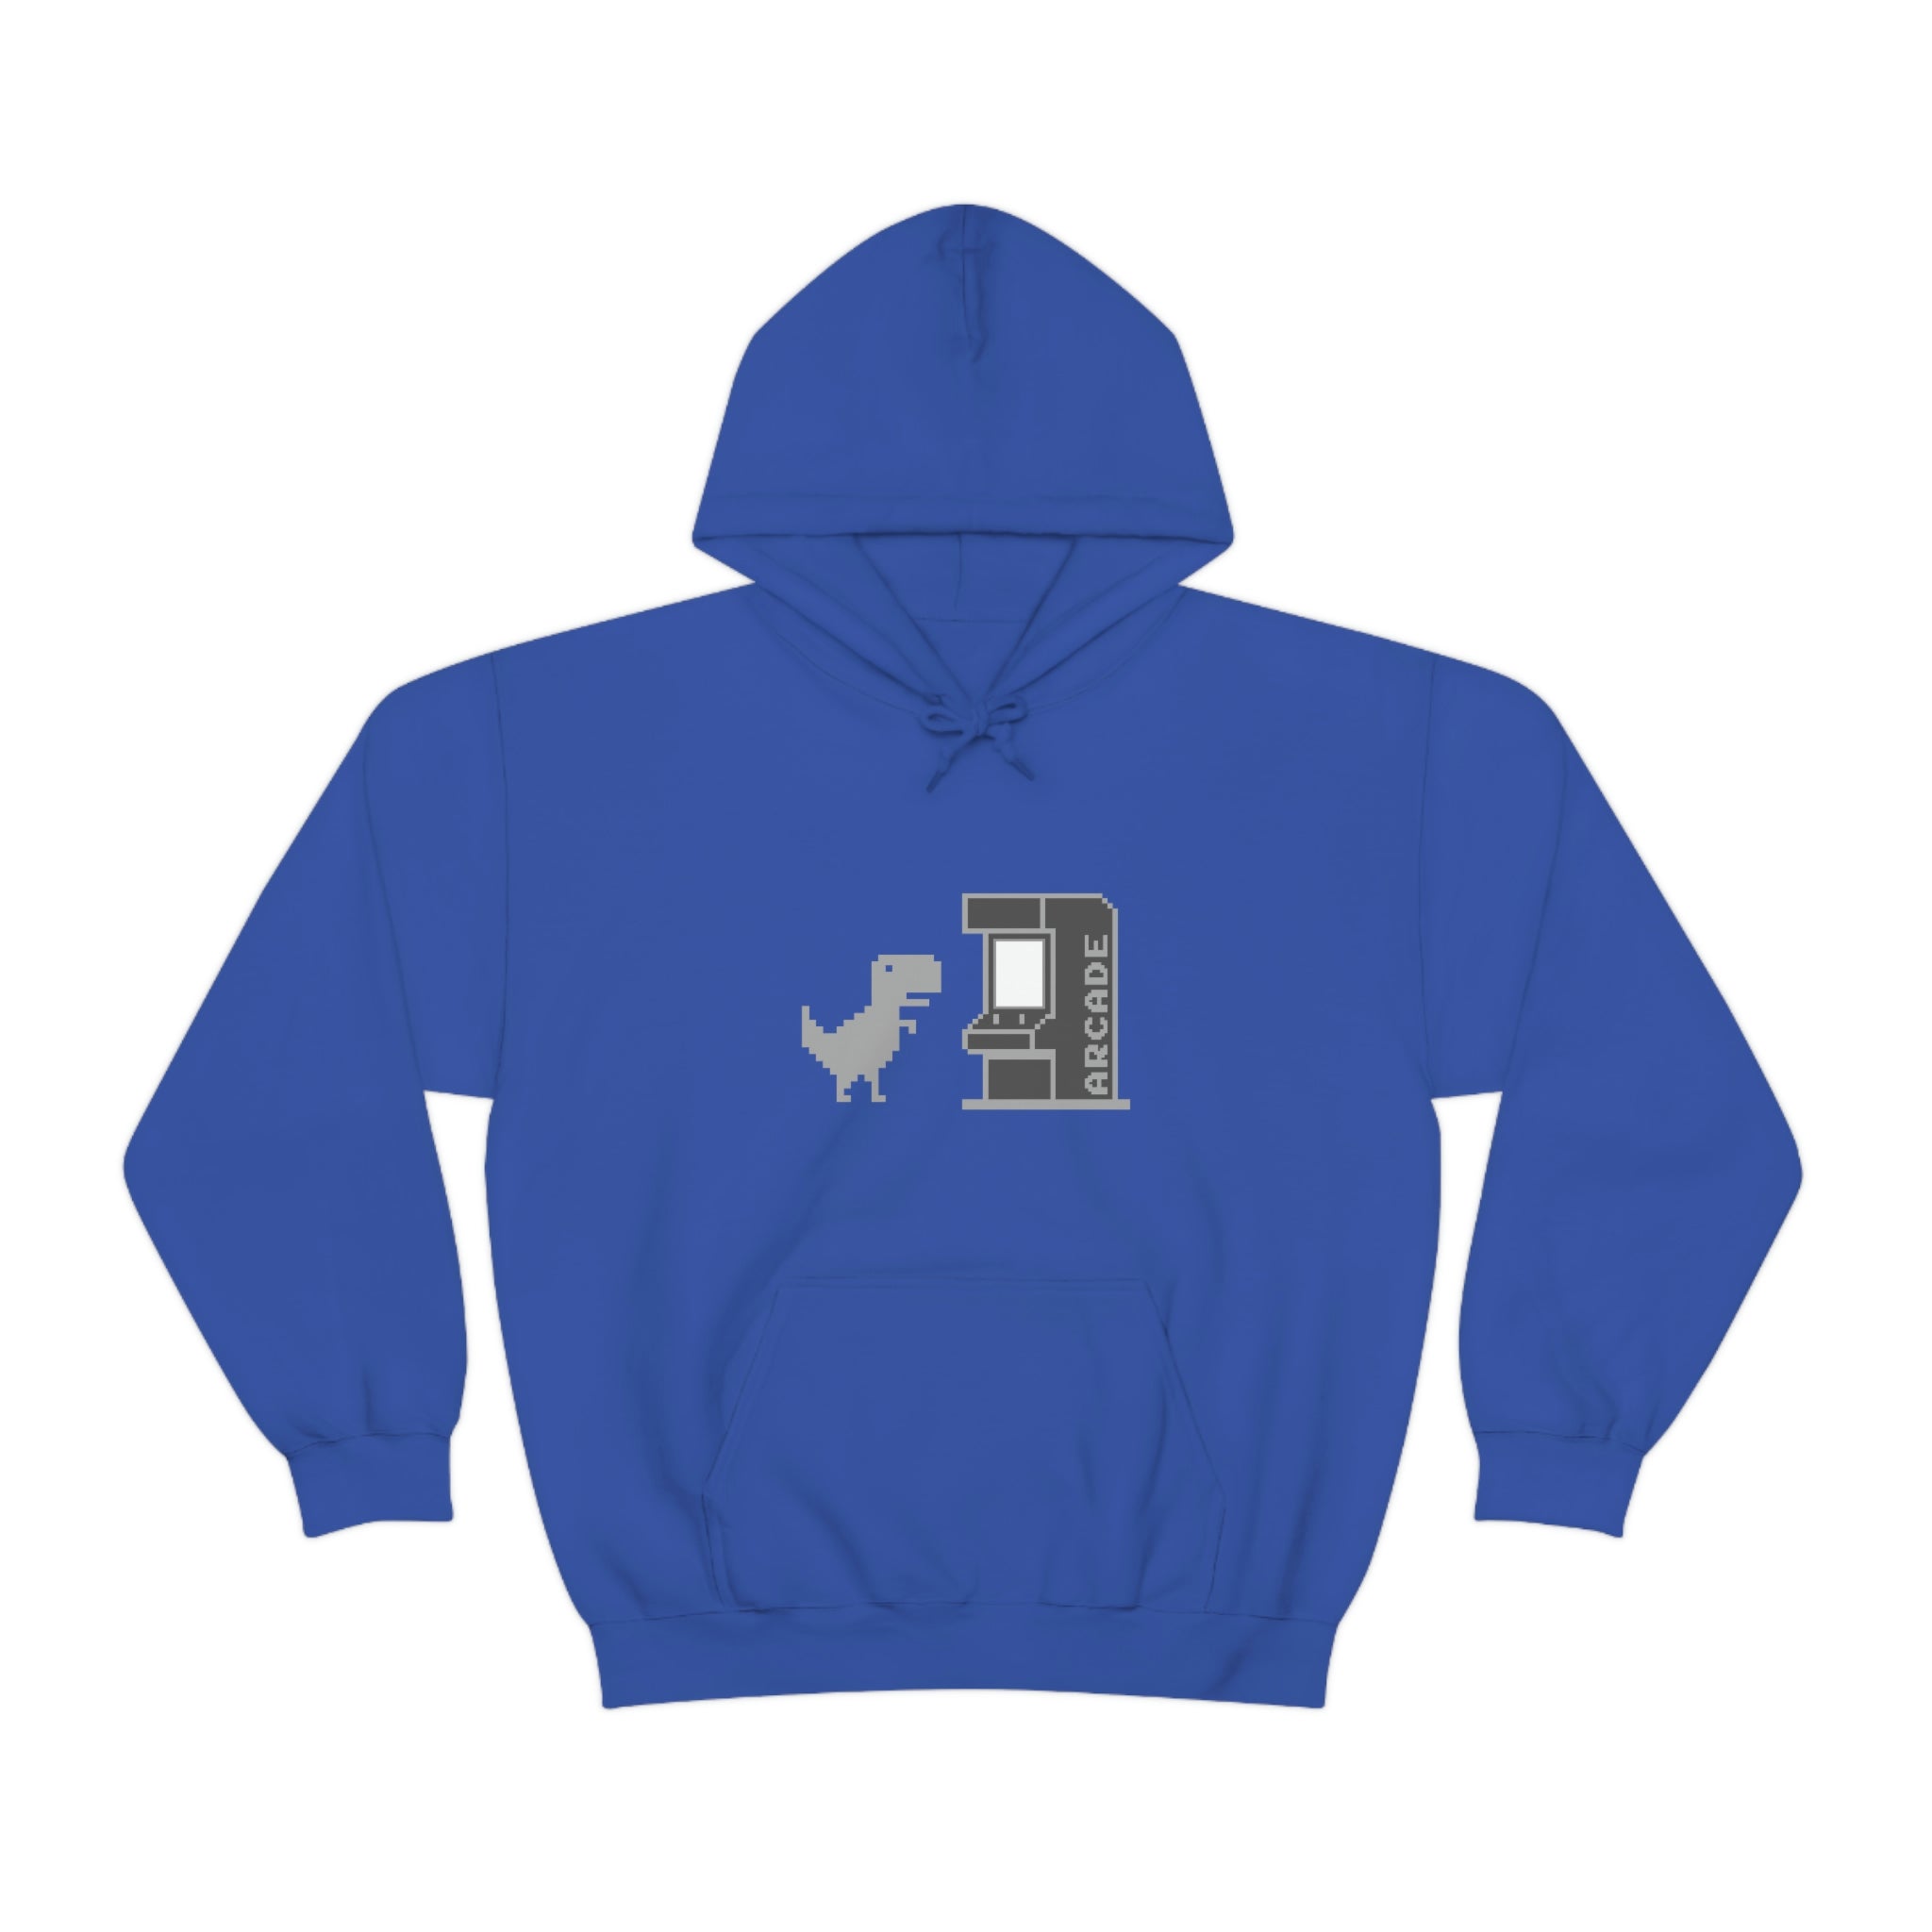 Larry the Dino at the Arcade : Regular Unisex Heavy Blend Hoodie